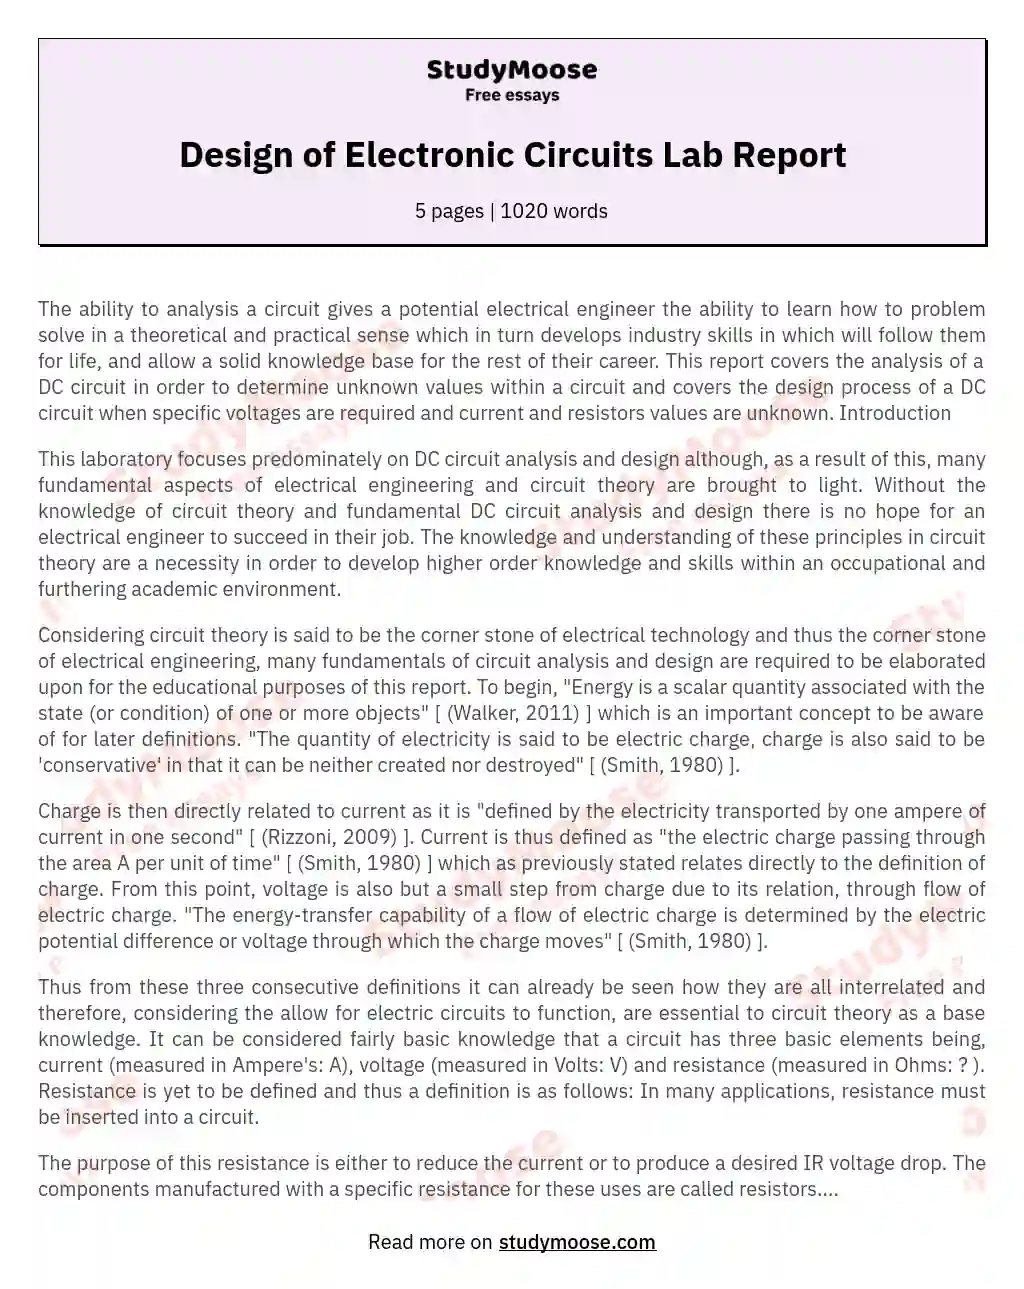 Design of Electronic Circuits Lab Report essay